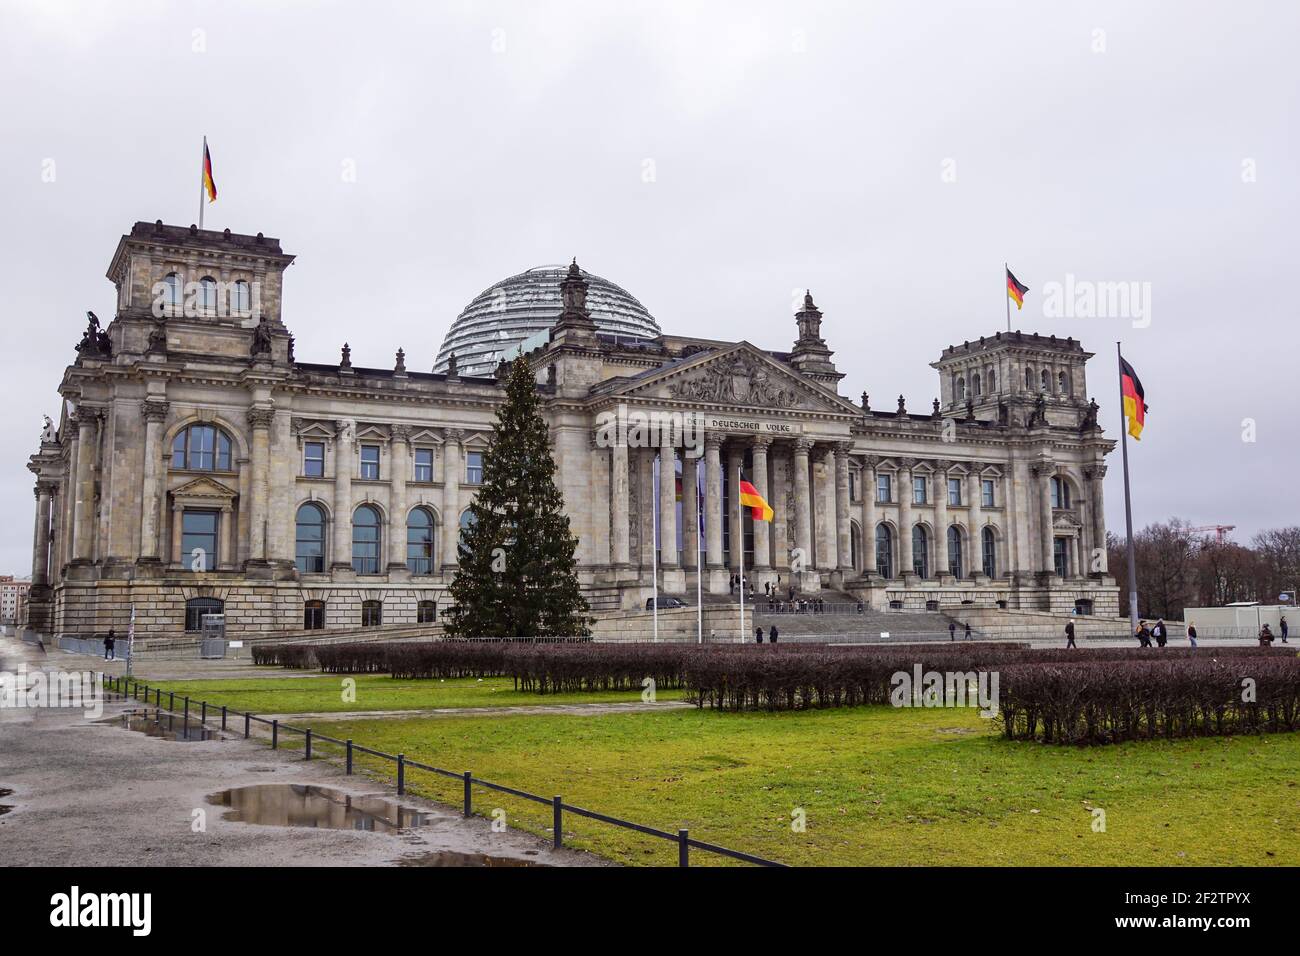 Berlin - December 2020 : The Cupola on top of the Reichstag building in Berlin. Winter view Stock Photo